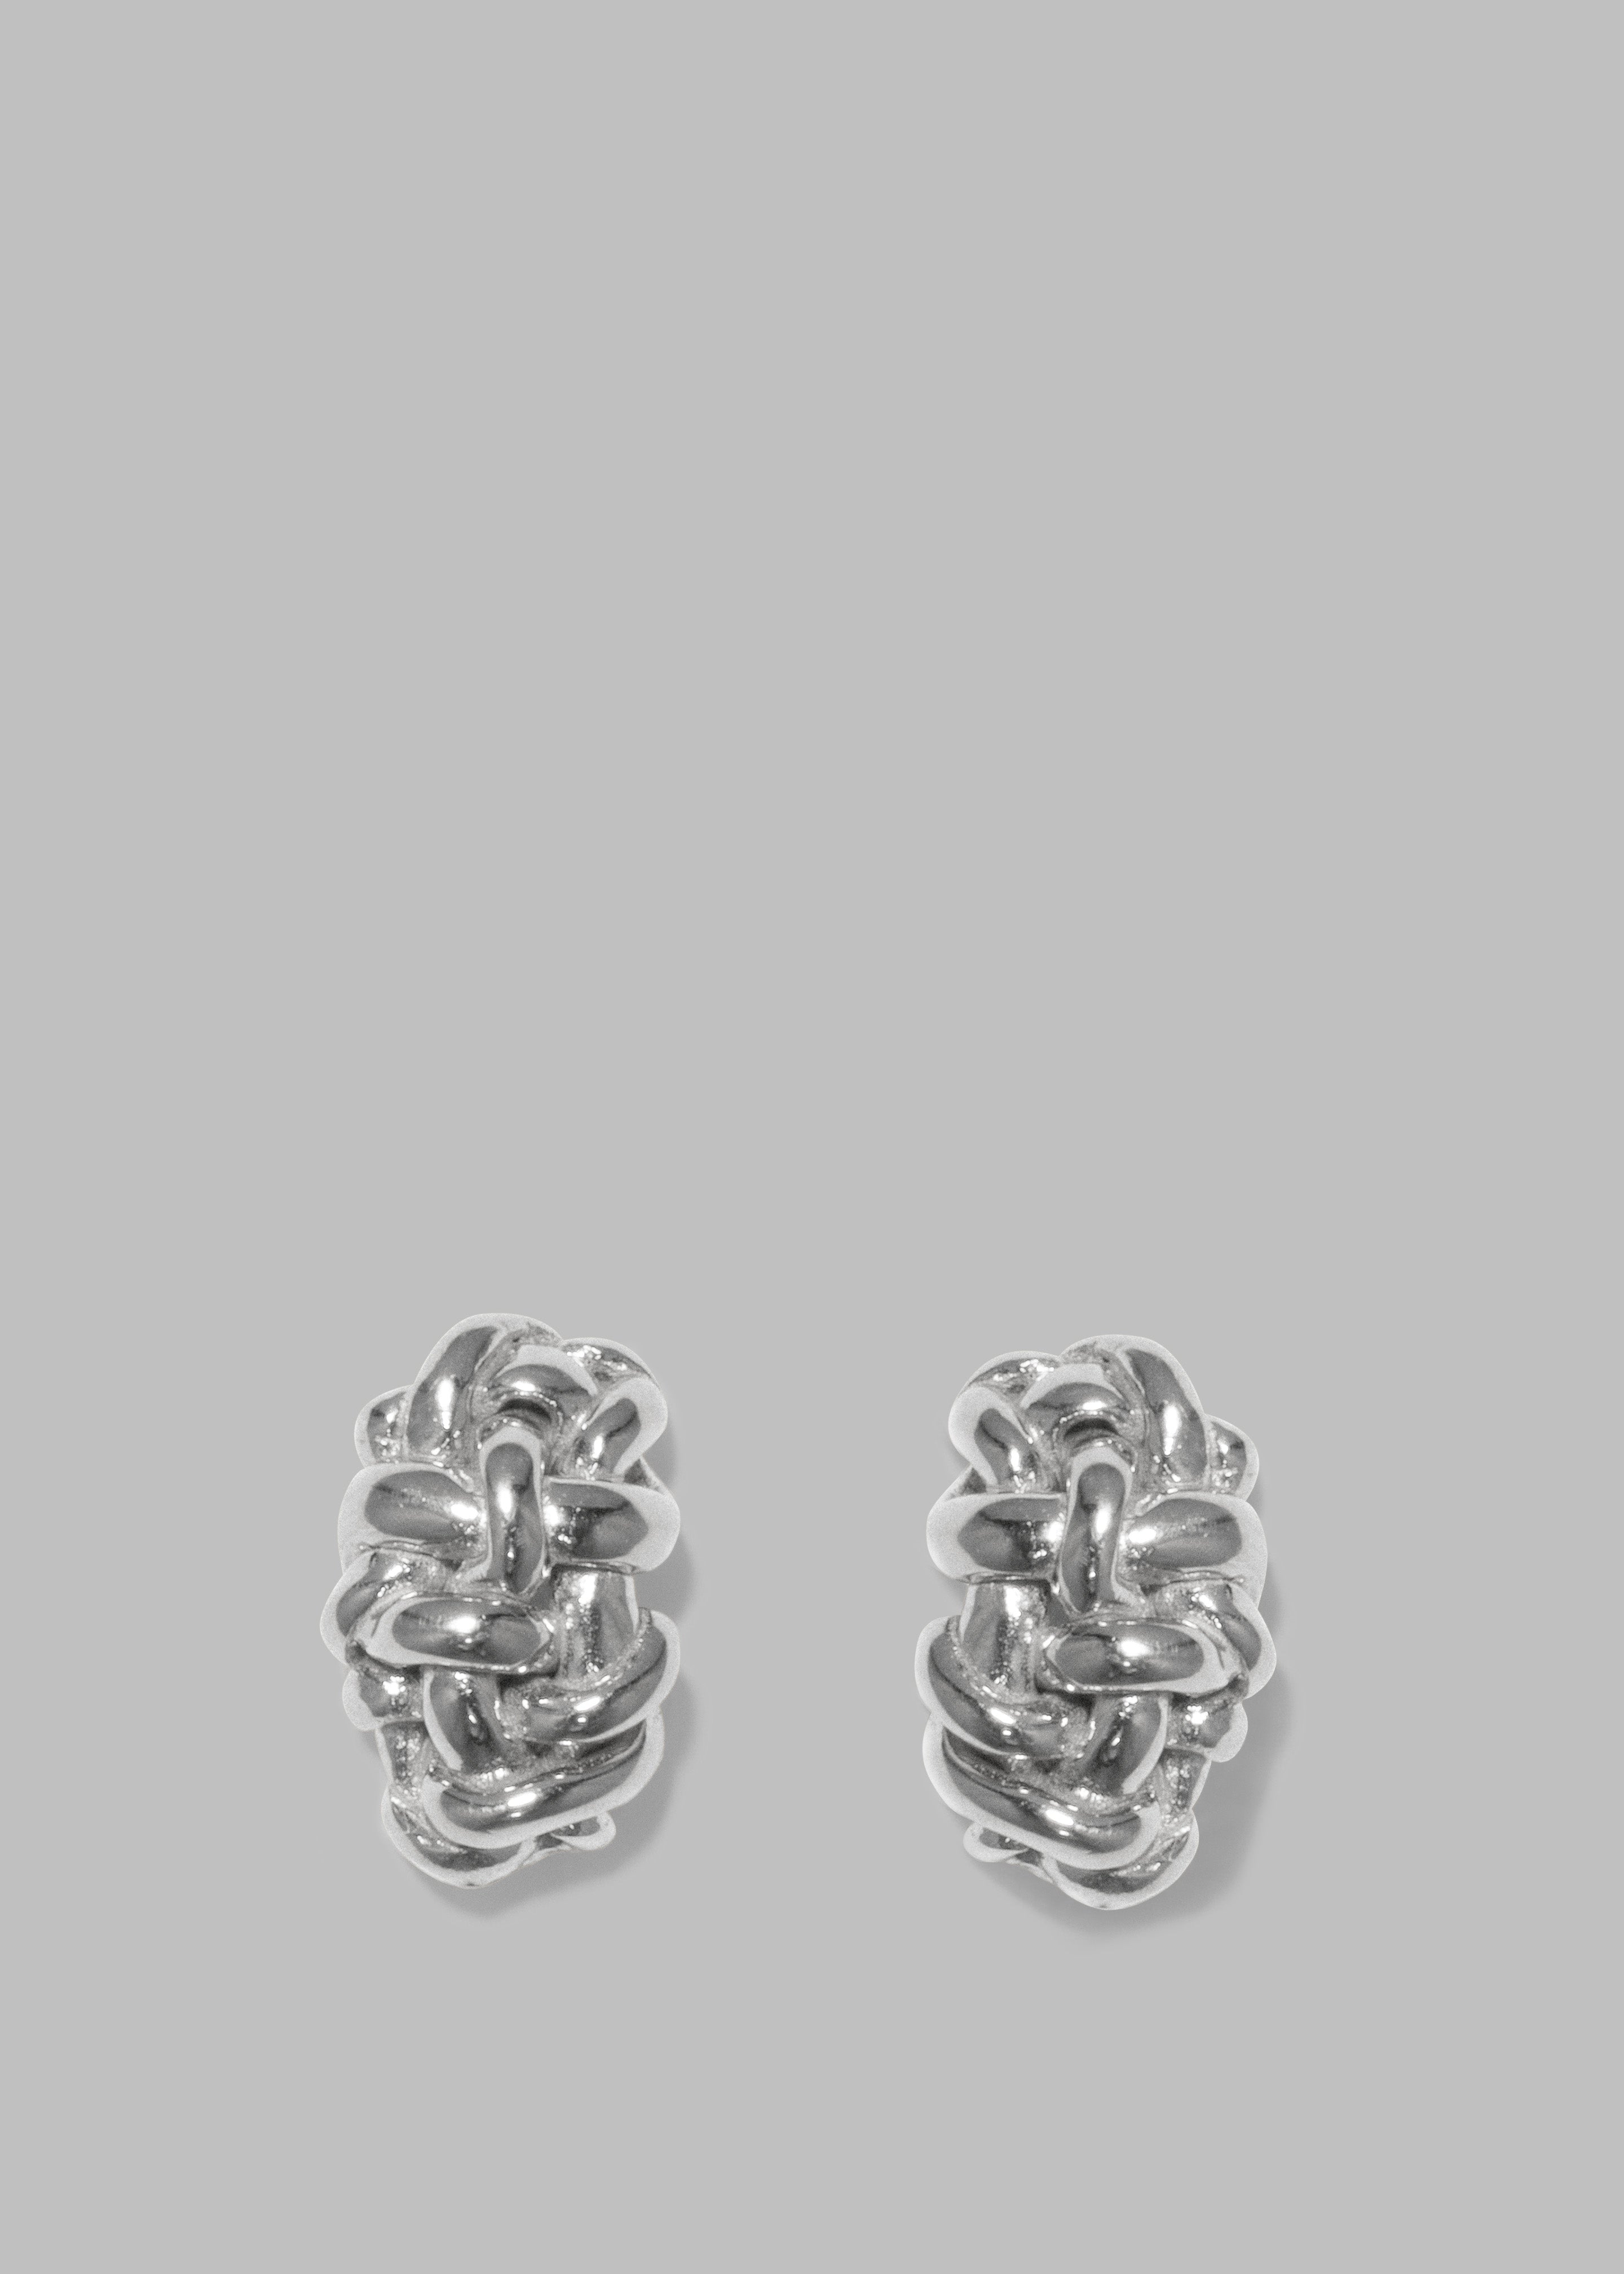 Completedworks The Paths of Memory Earrings - Rhodium Plated - 1